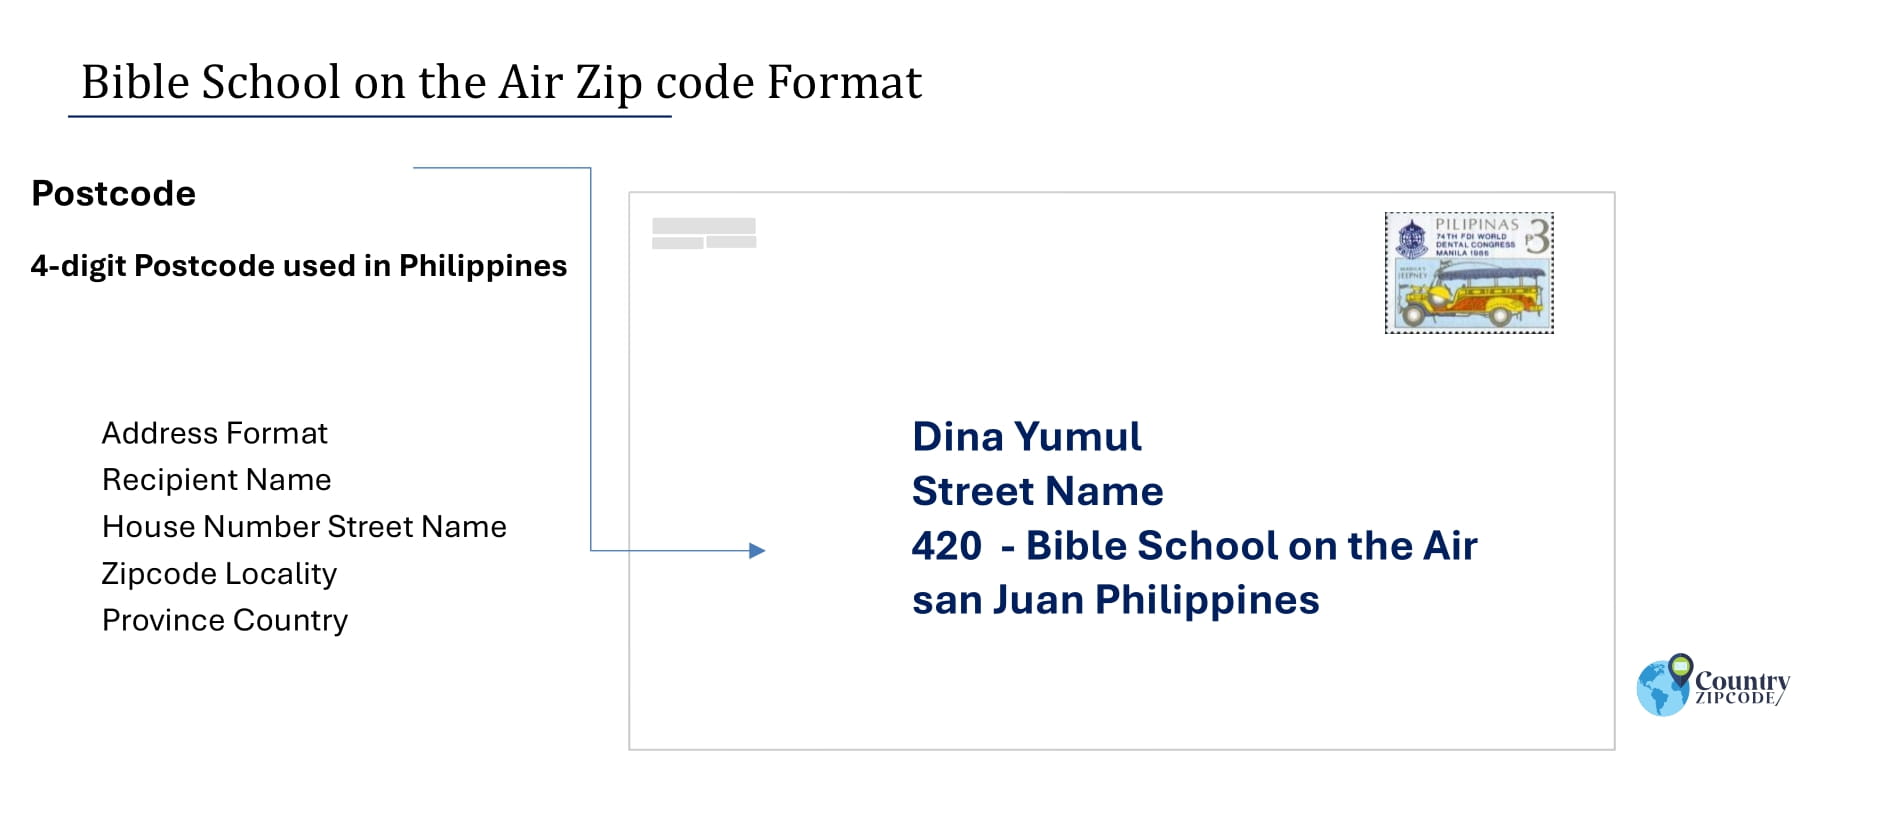 example of Bible School on the Air Philippines zip code and address format